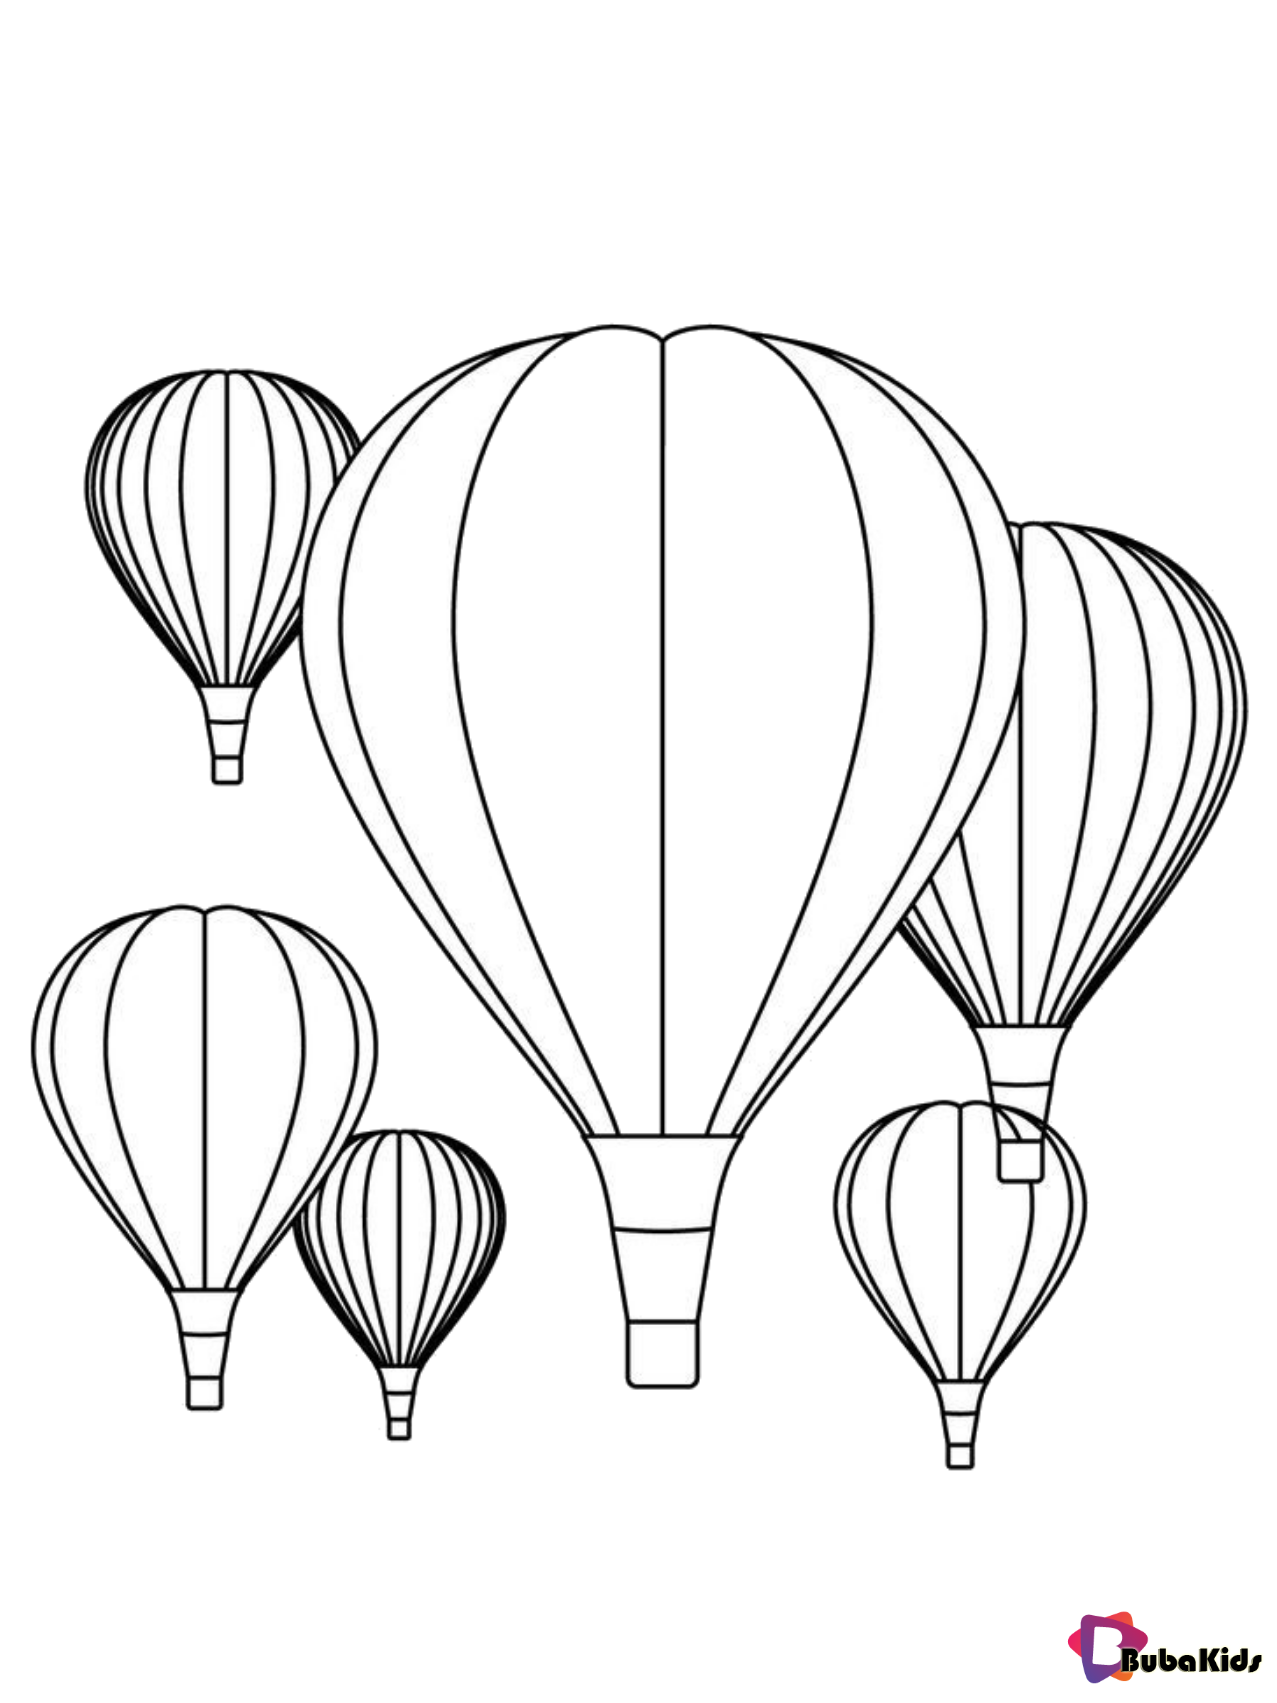 Hot air balloon coloring page for kids Wallpaper